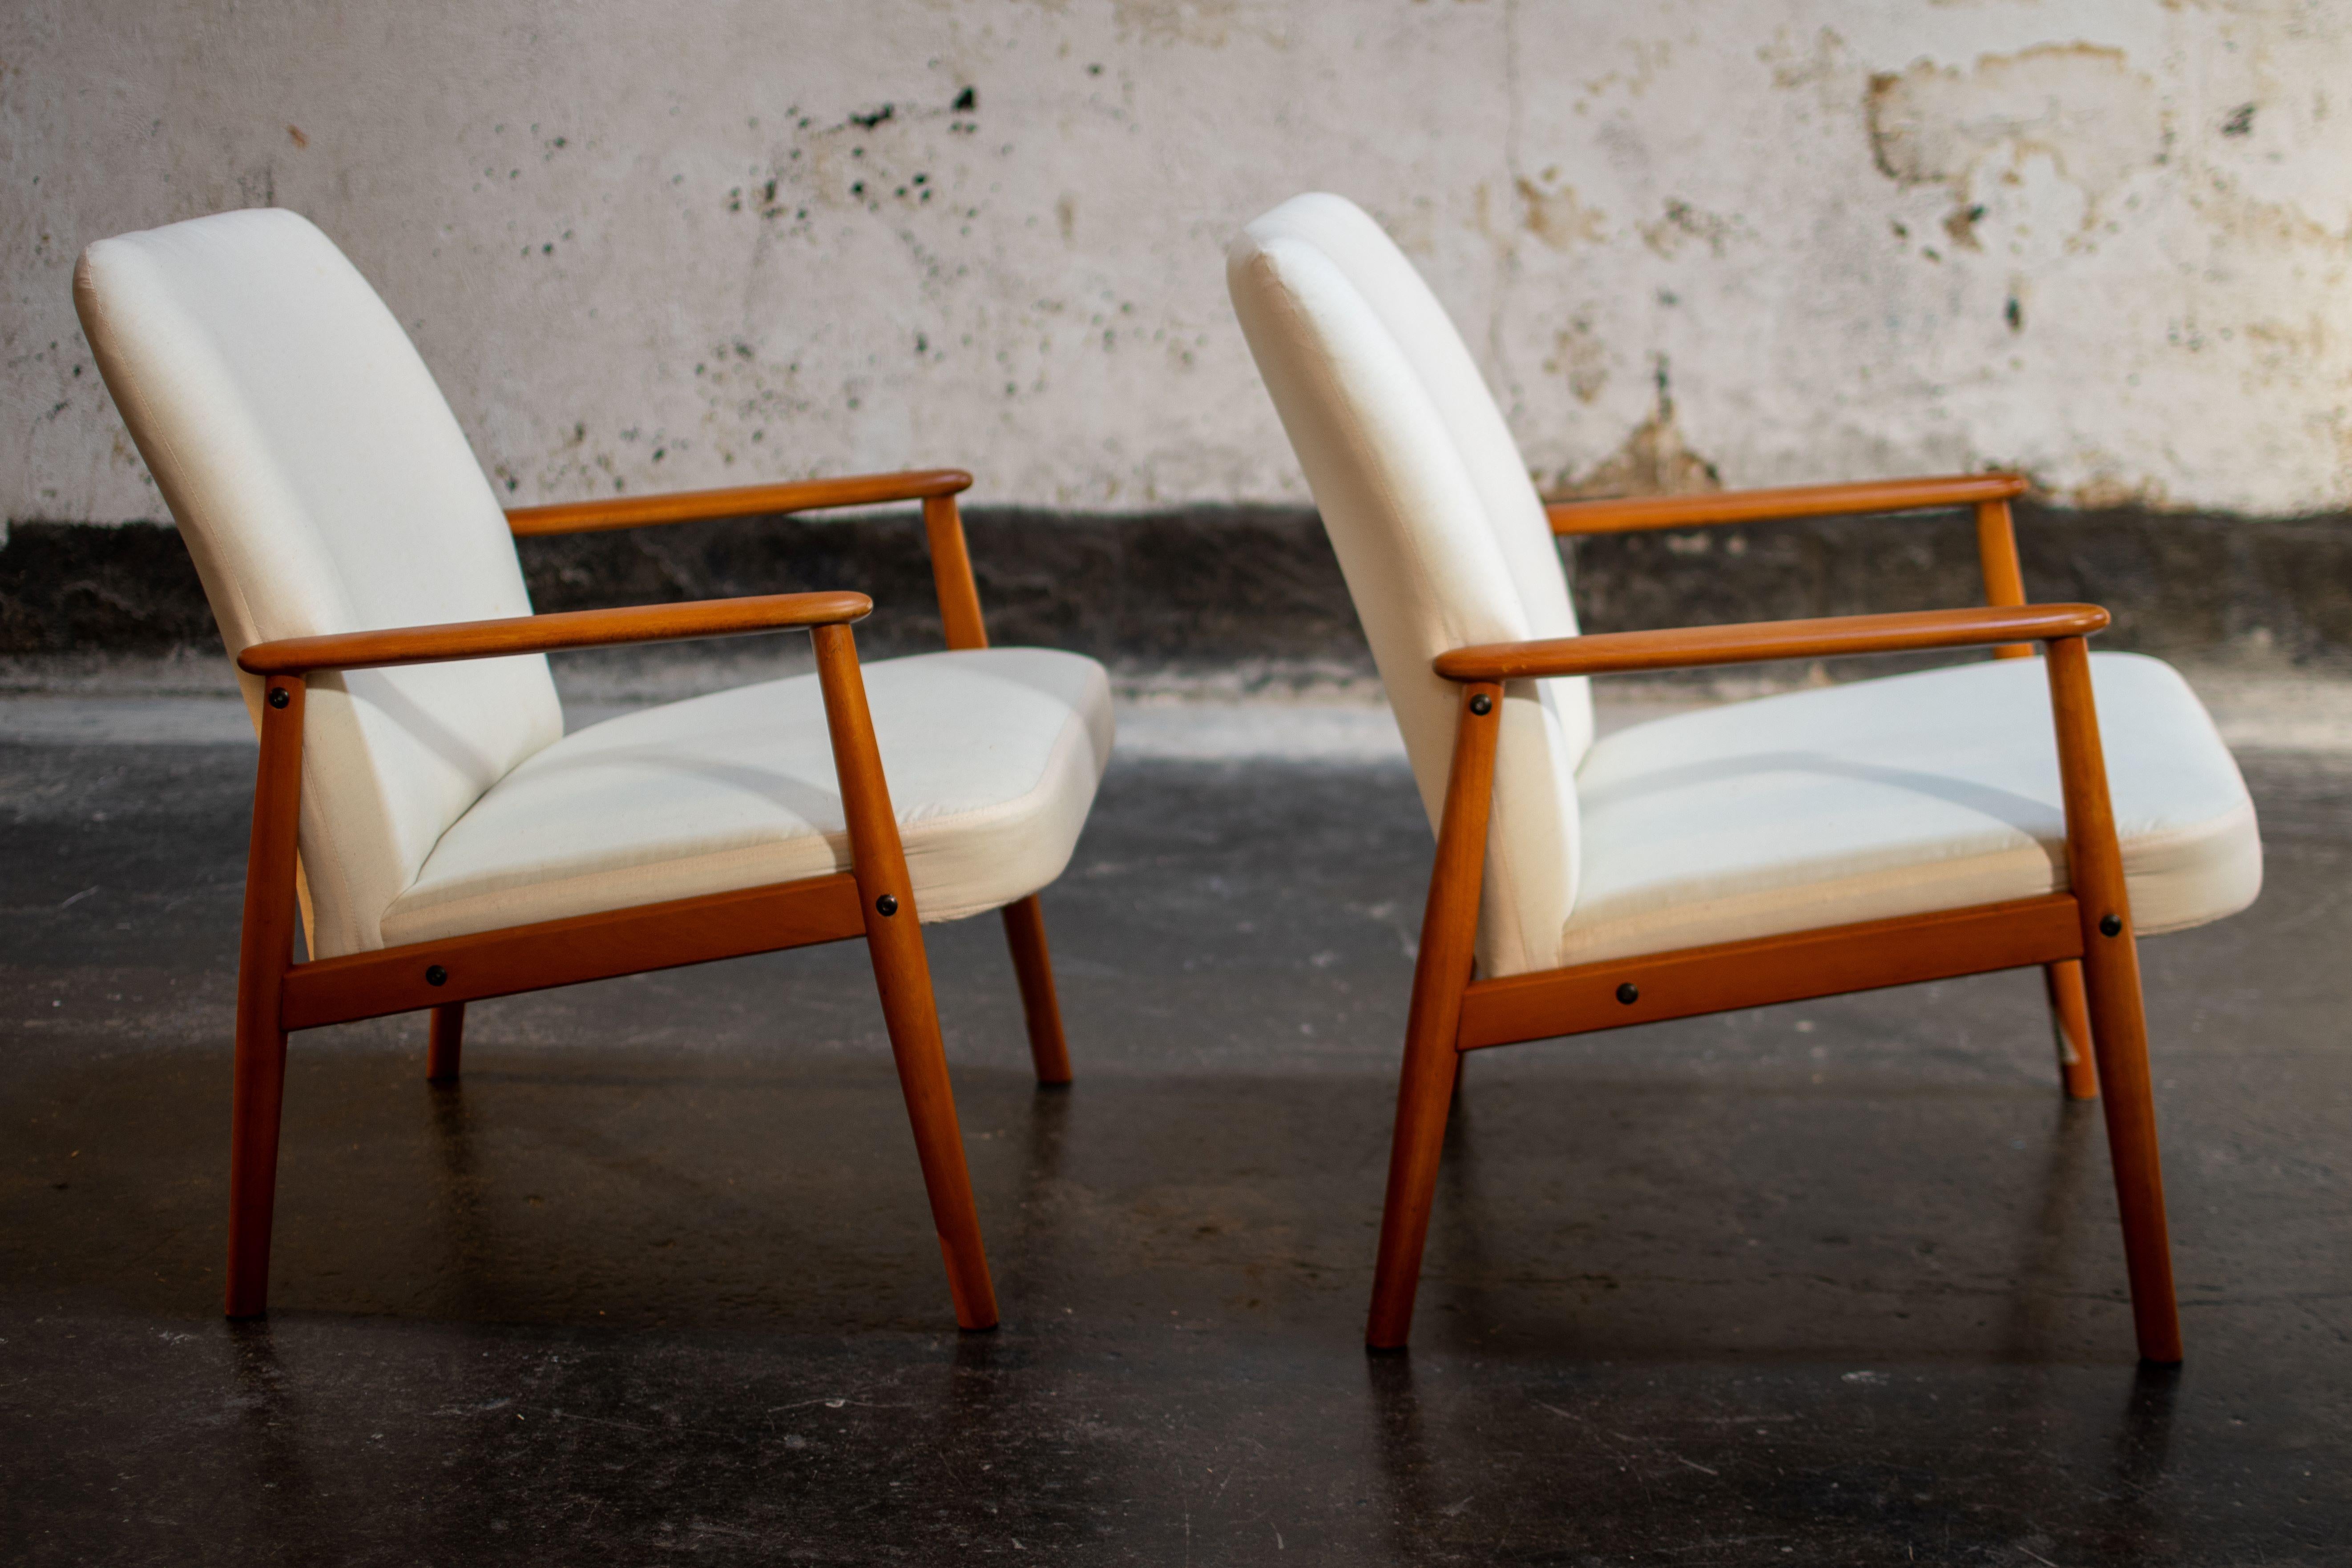 Hand-Crafted Pair of Scandinavian Modern Chairs - COM Ready For Sale